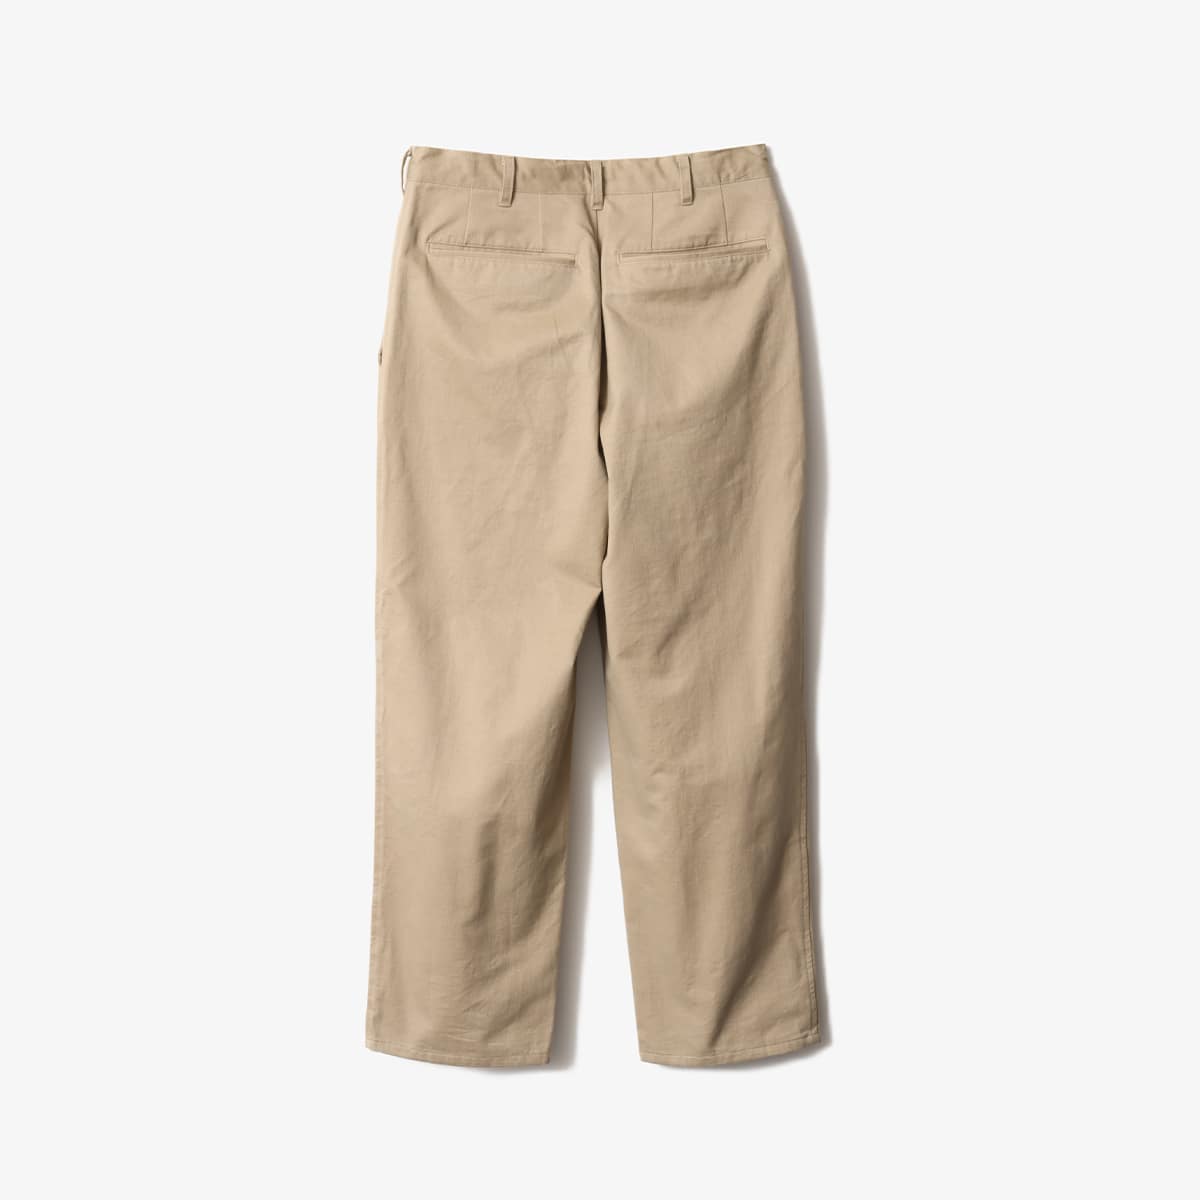 atmos Baggy Tapered Chino Pants BEIGE